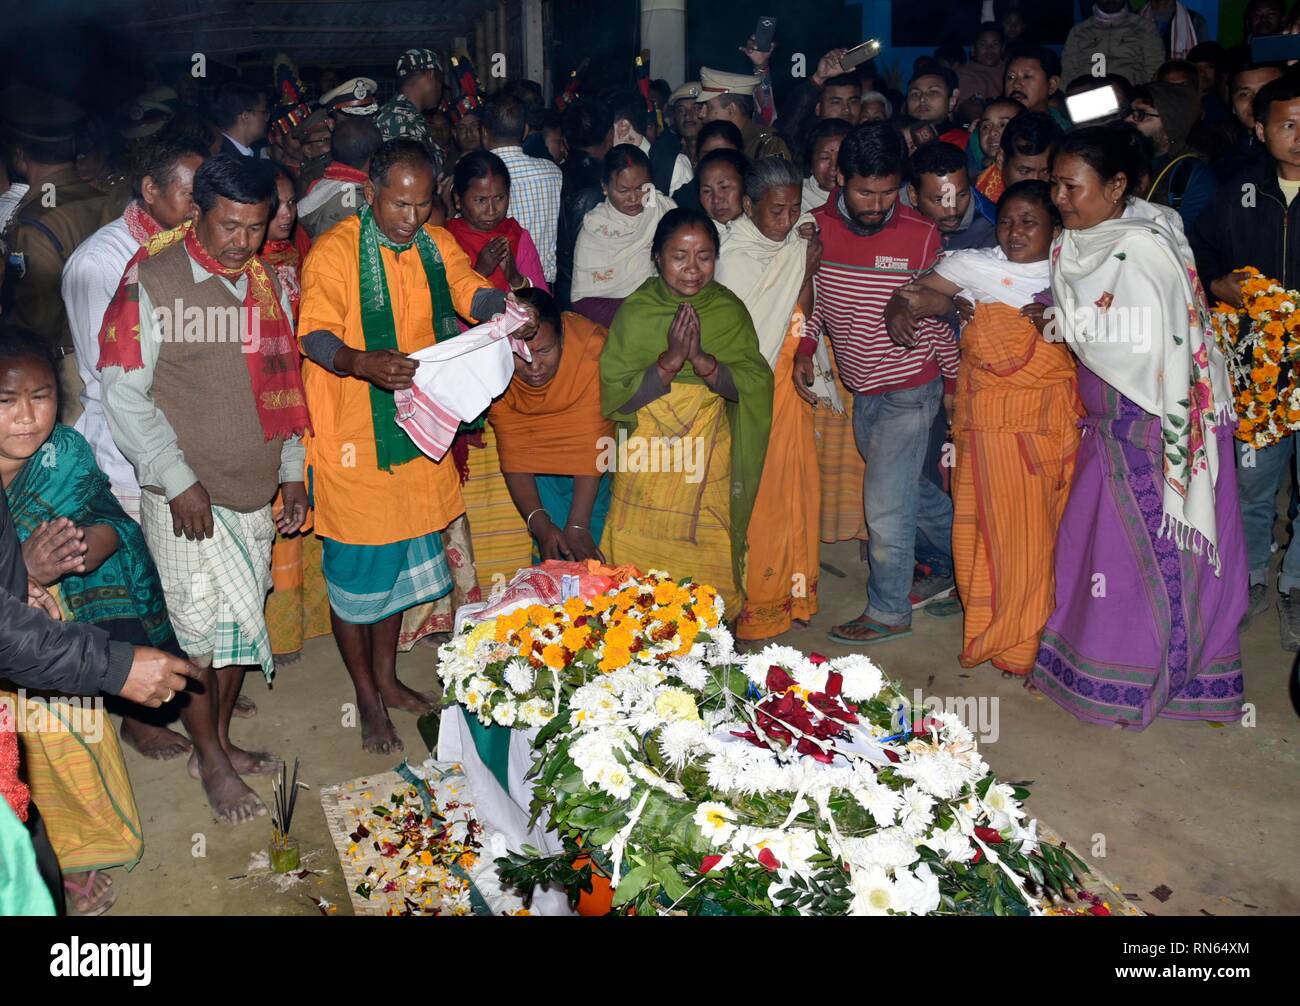 Assam, India. 16th Feb, 2019. Martyr Maneshwar Basumatary. Baksa, Assam, India. 16February 2019. Family members and relatives of slain Central Reserve Police Force (CRPF) soldier, Maneshwar Basumatary mourn near his coffin before his cremation ceremony at village Tamulpur in Baksa district, Assam, India, 16 February 2019. At least 44 Indian paramilitary Central Reserve Police Force personnel were killed and several injured when a Jaish-e-Mohammed militant rammed an explosive-laden vehicle into a CRPF convoy along the Srinagar-Jammu highway at Lethpora area in South Kashmir's Pulwama district o Stock Photo